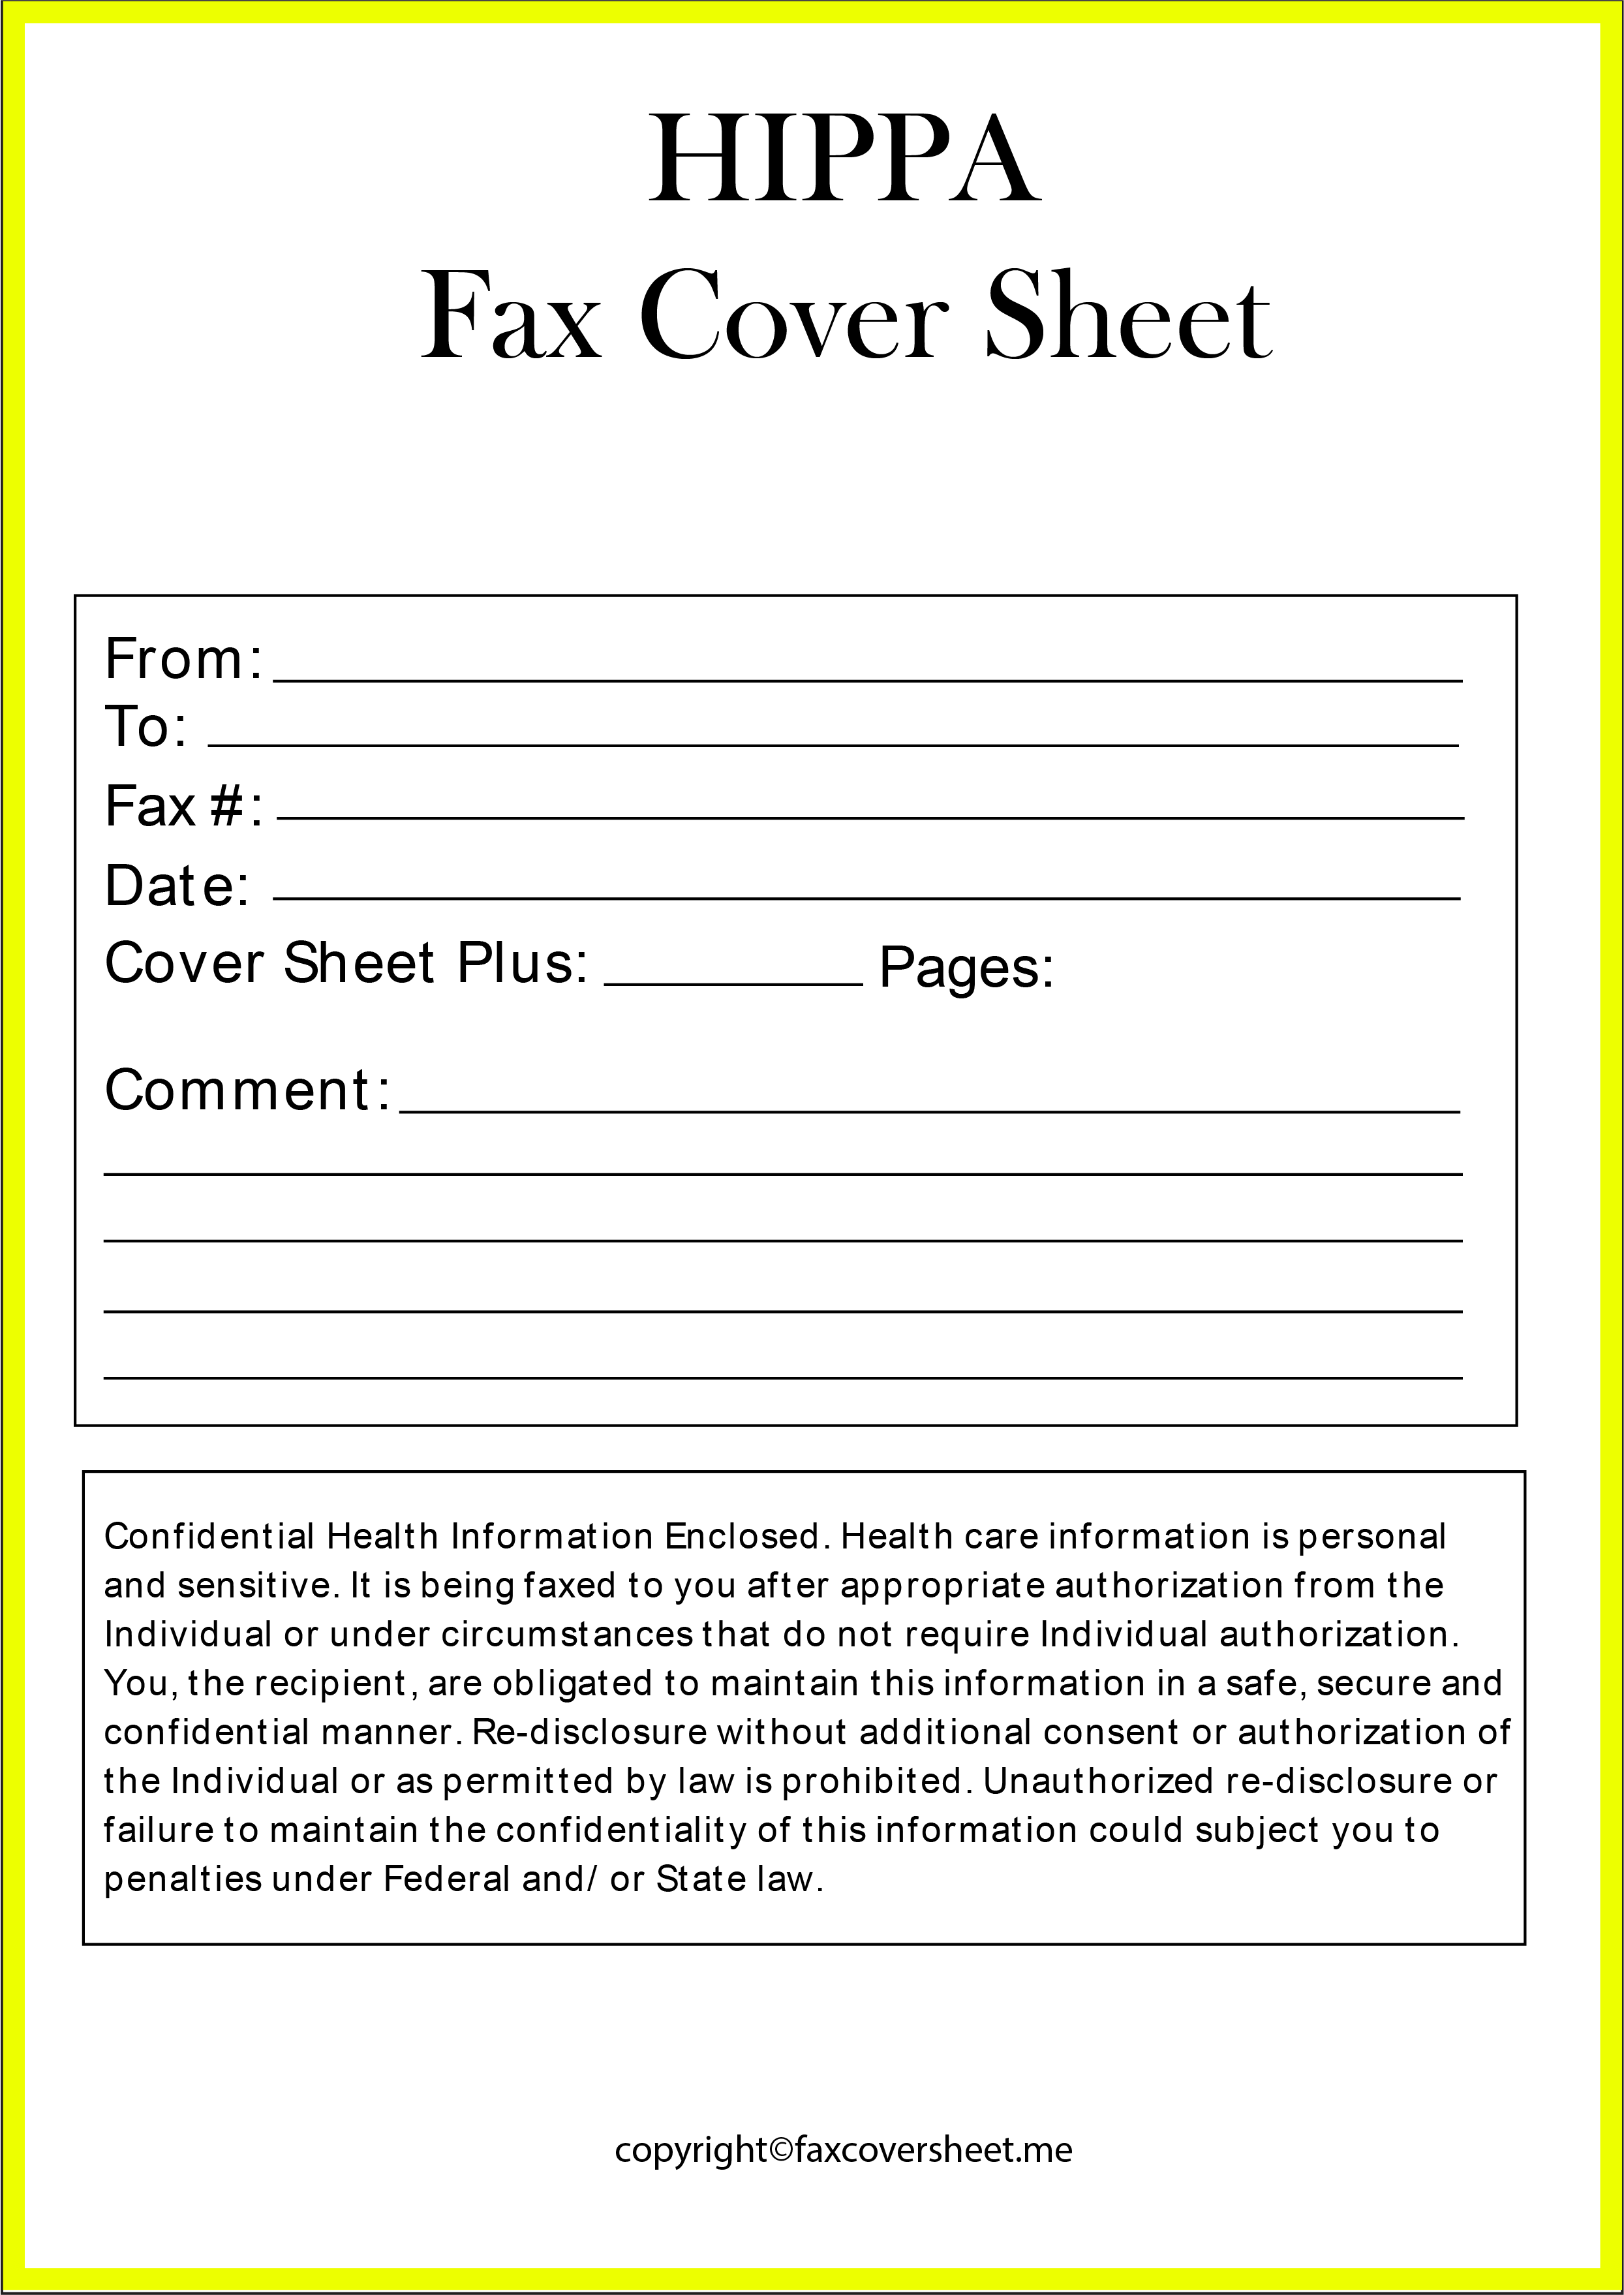 hipaa-confidentiality-statement-for-fax-cover-sheet-fax-cover-sheet